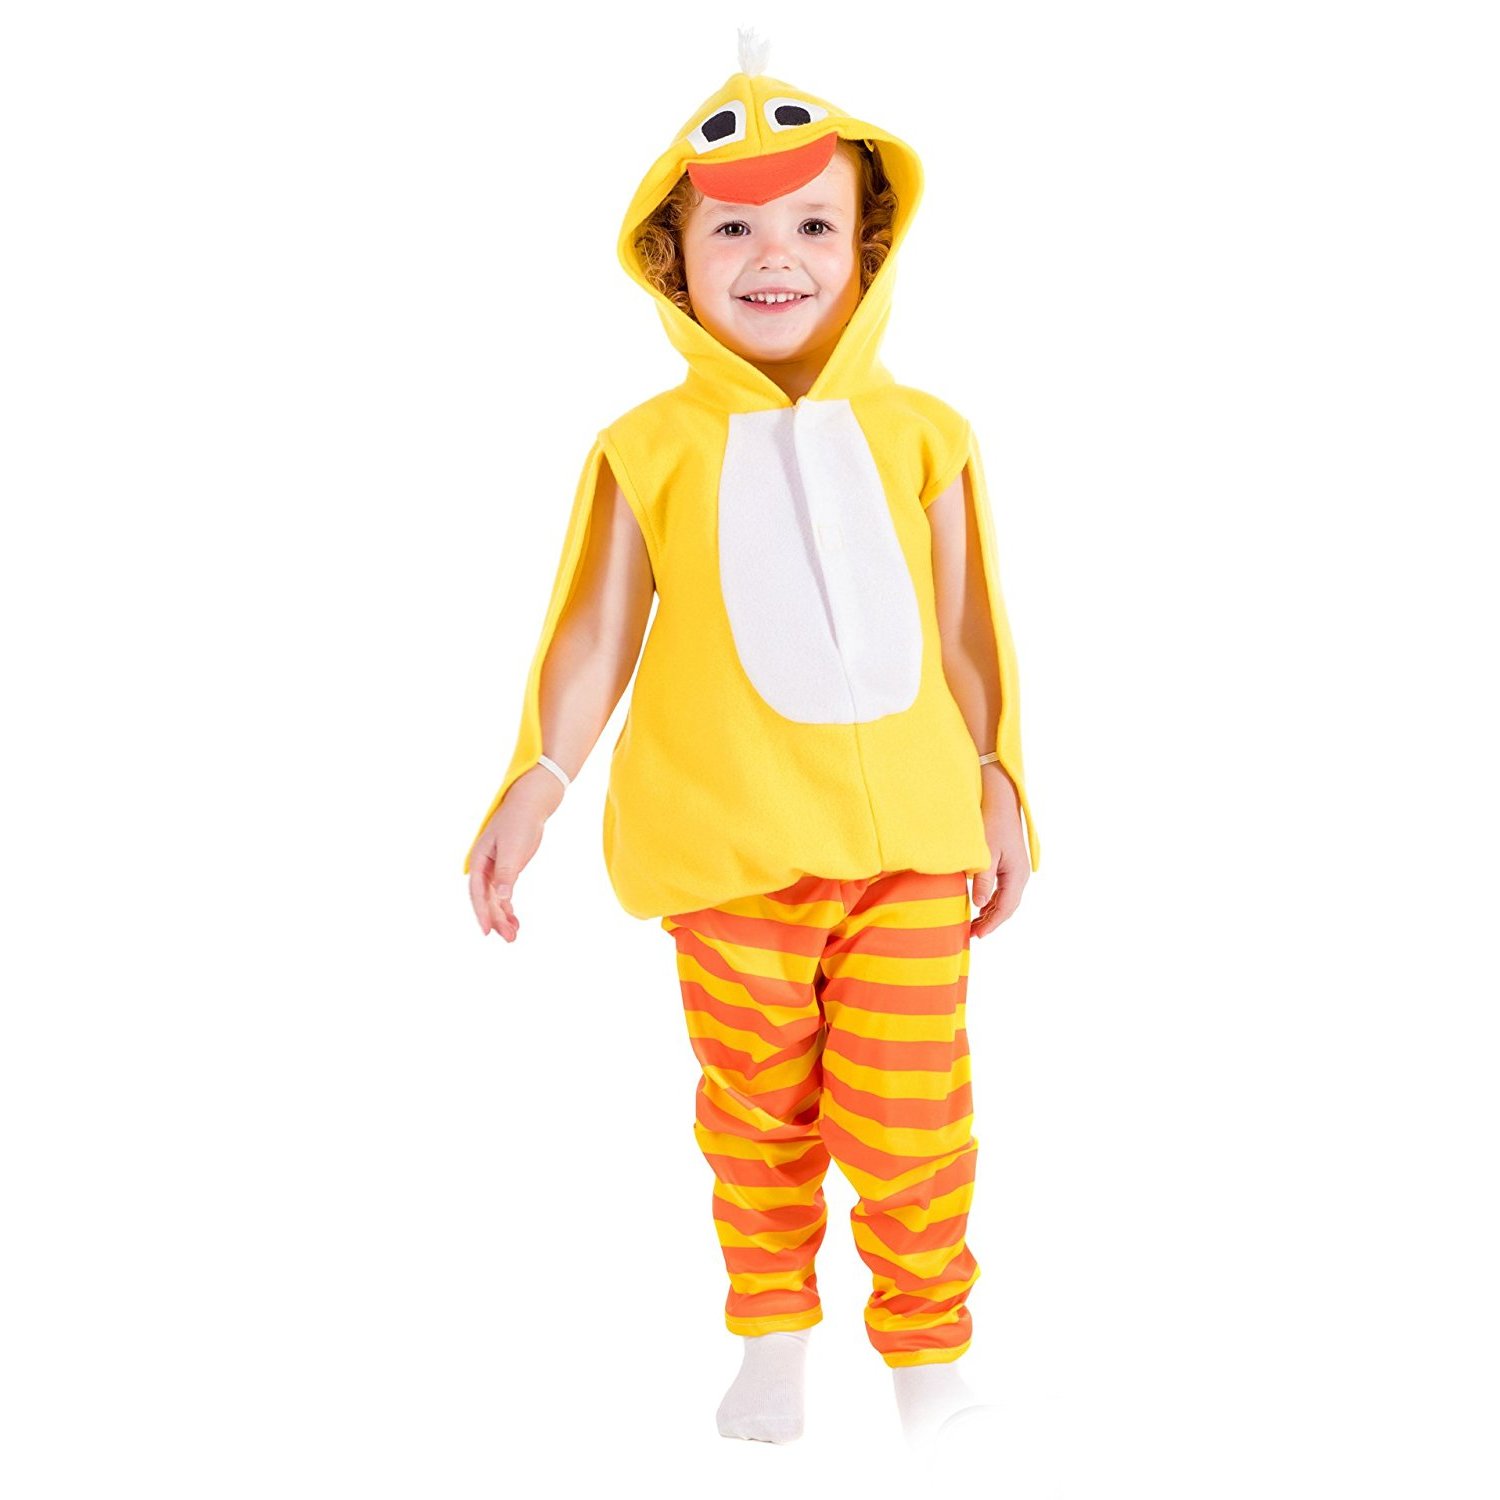 Chick 1-2 Years - Toddler Costume Boys Girls Easter Chicken Fancy Dress Kids -  toddler chick costume boys girls easter chicken fancy dress kids farm